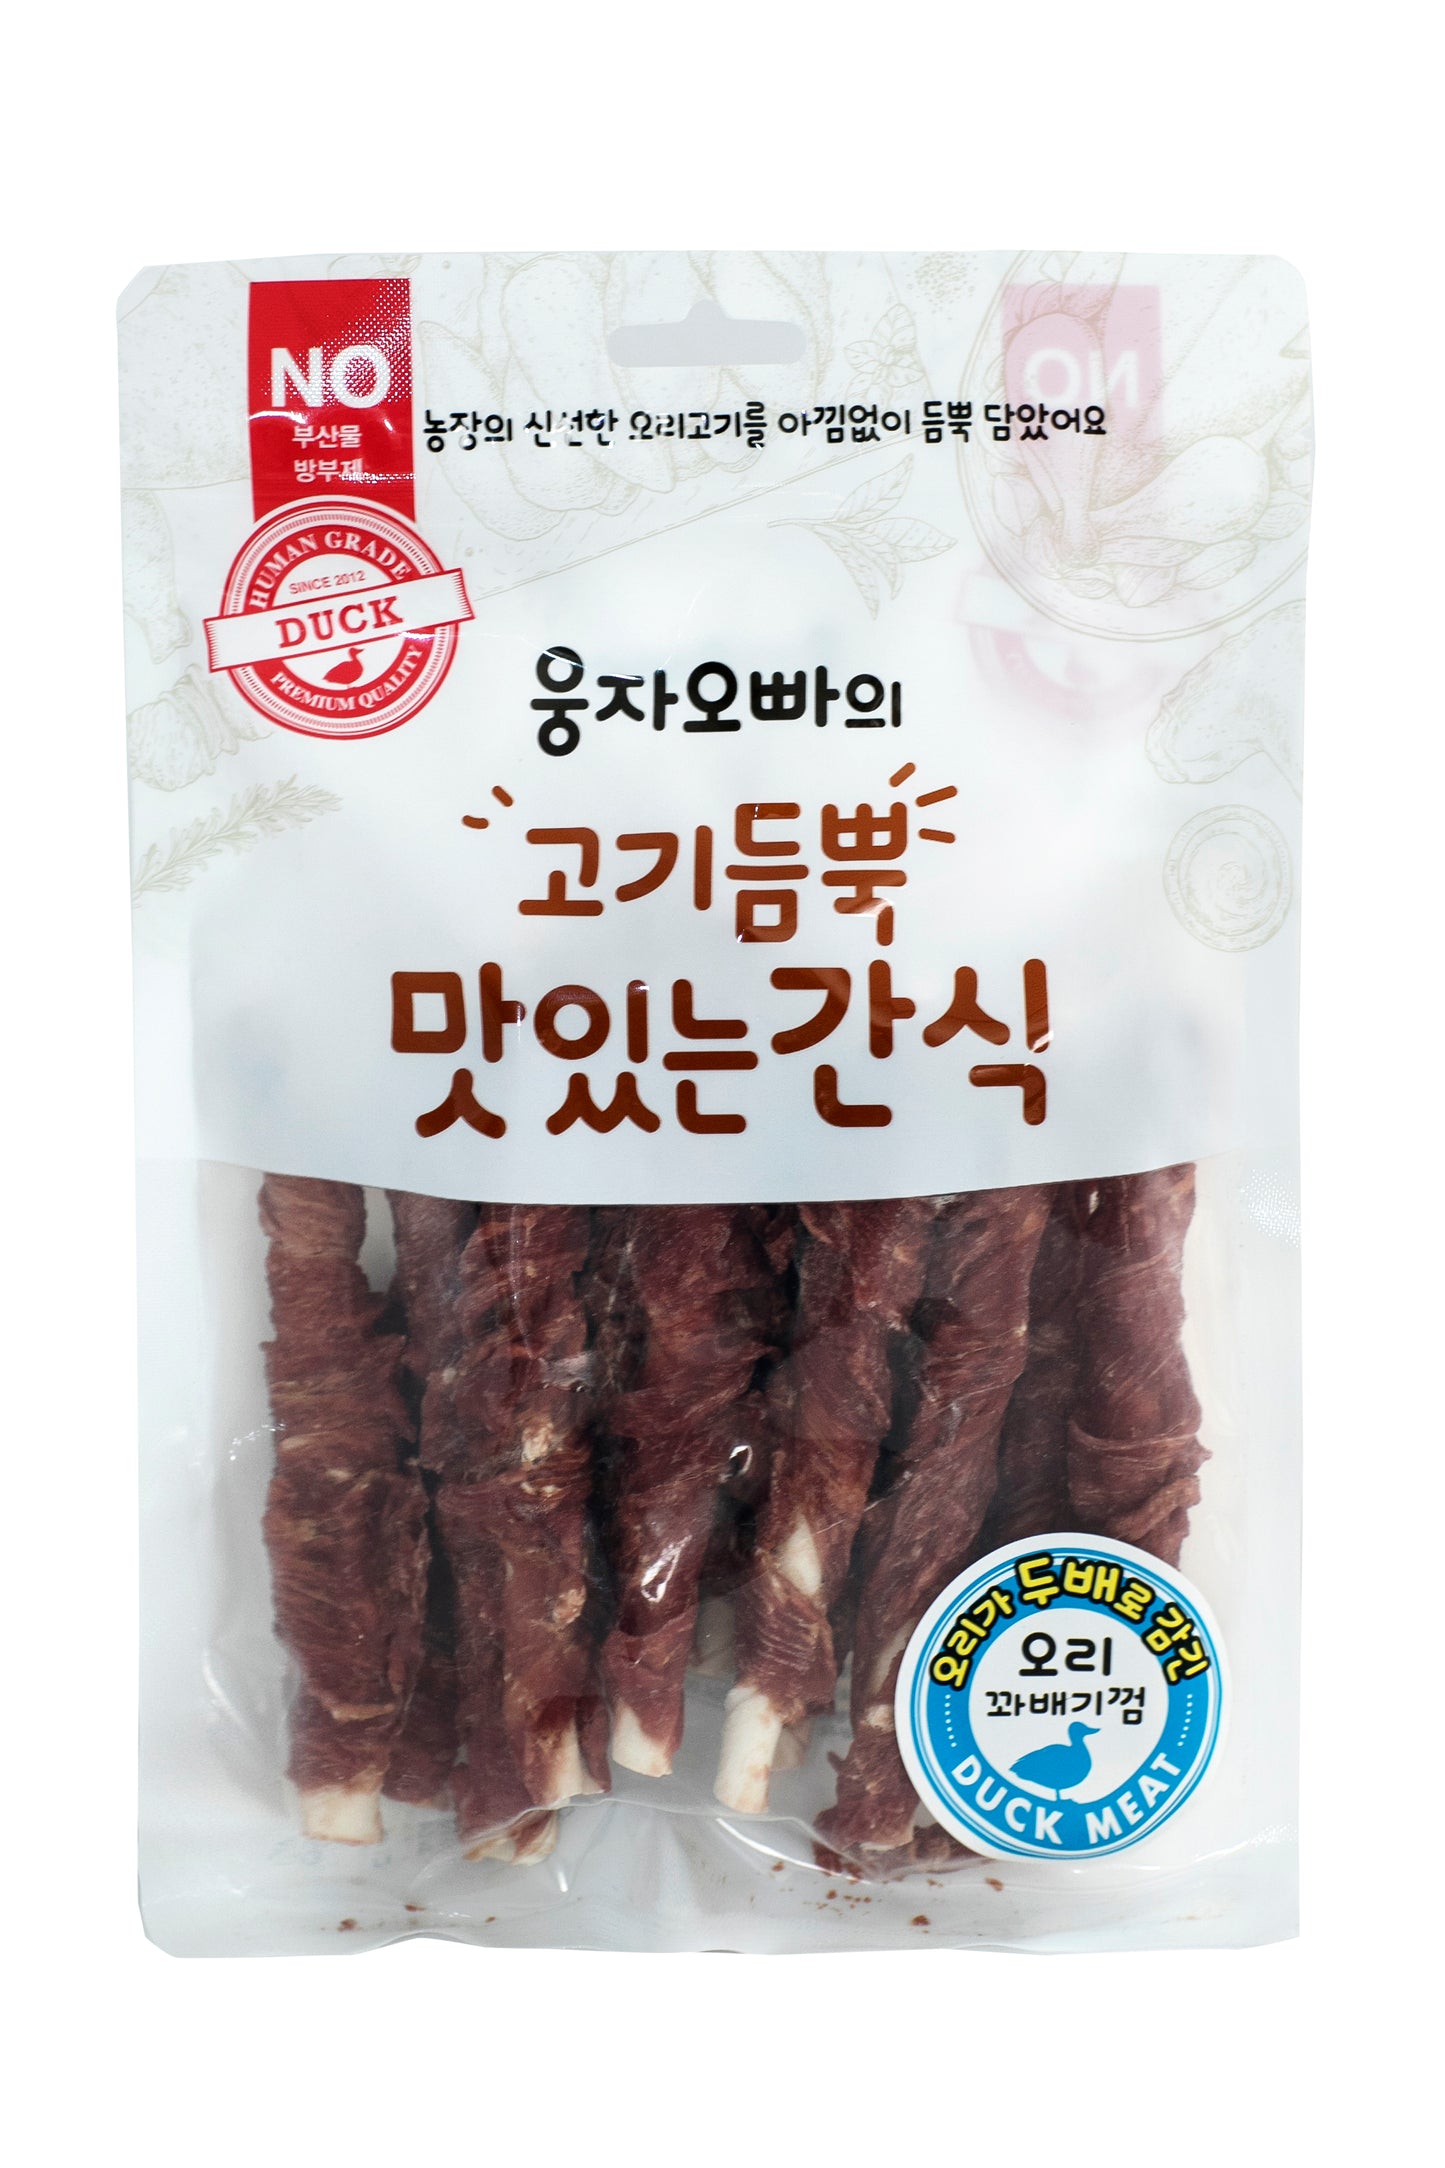 Ungja oppa's meat-filled delicious snack duck twist chewing gum 210g pet dog snack beef jerky